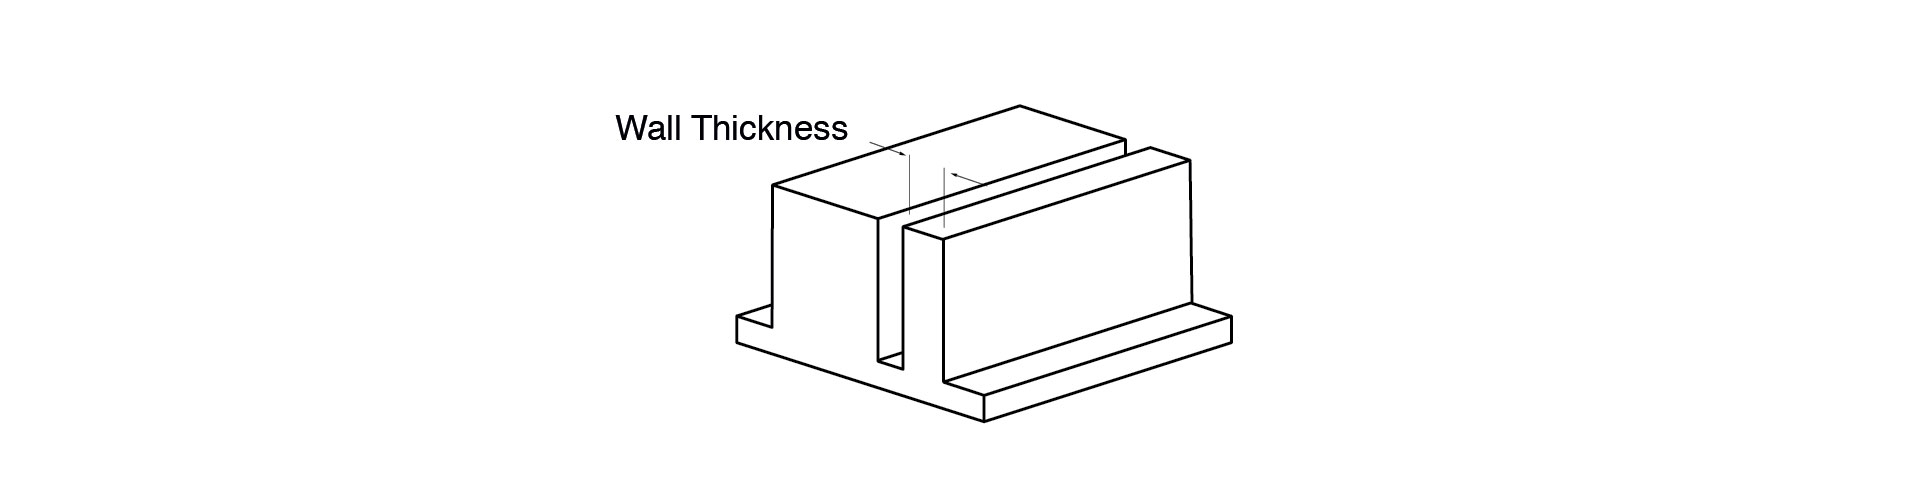 Varied wall thickness in vacuum (urethane) casting designs